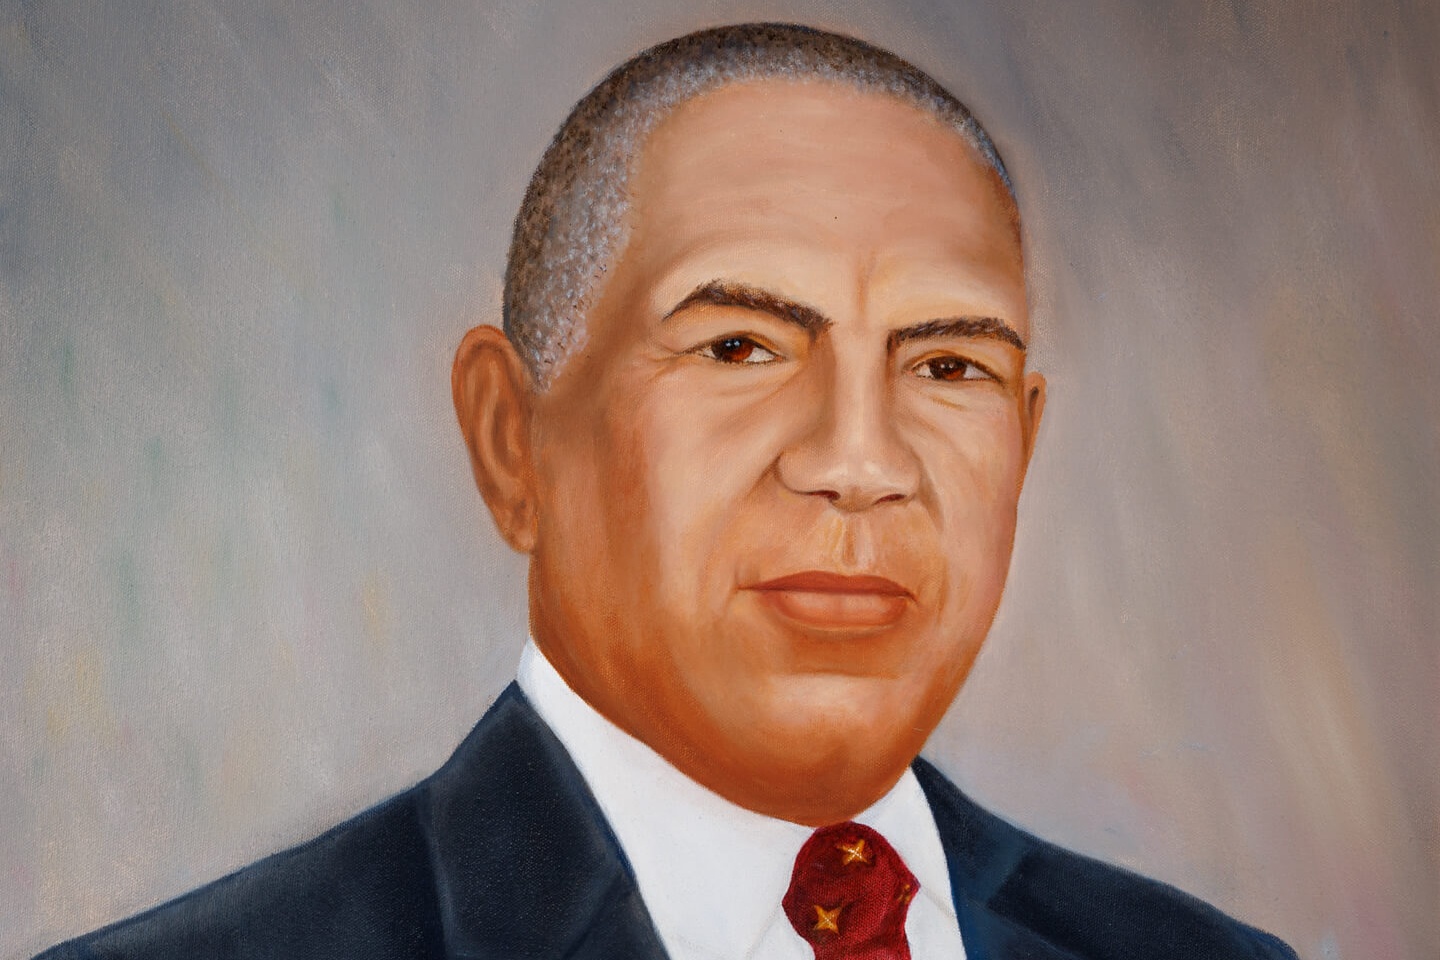 Percy Hunter Stone, Georgia’s first Black 4-H state leader in the era of segregation, was inducted into the National 4-H Hall of Fame. Stone is credited with the establishment of Dublin 4-H Center, opened as the first state center for Black 4-H’ers in the U.S. in 1957.